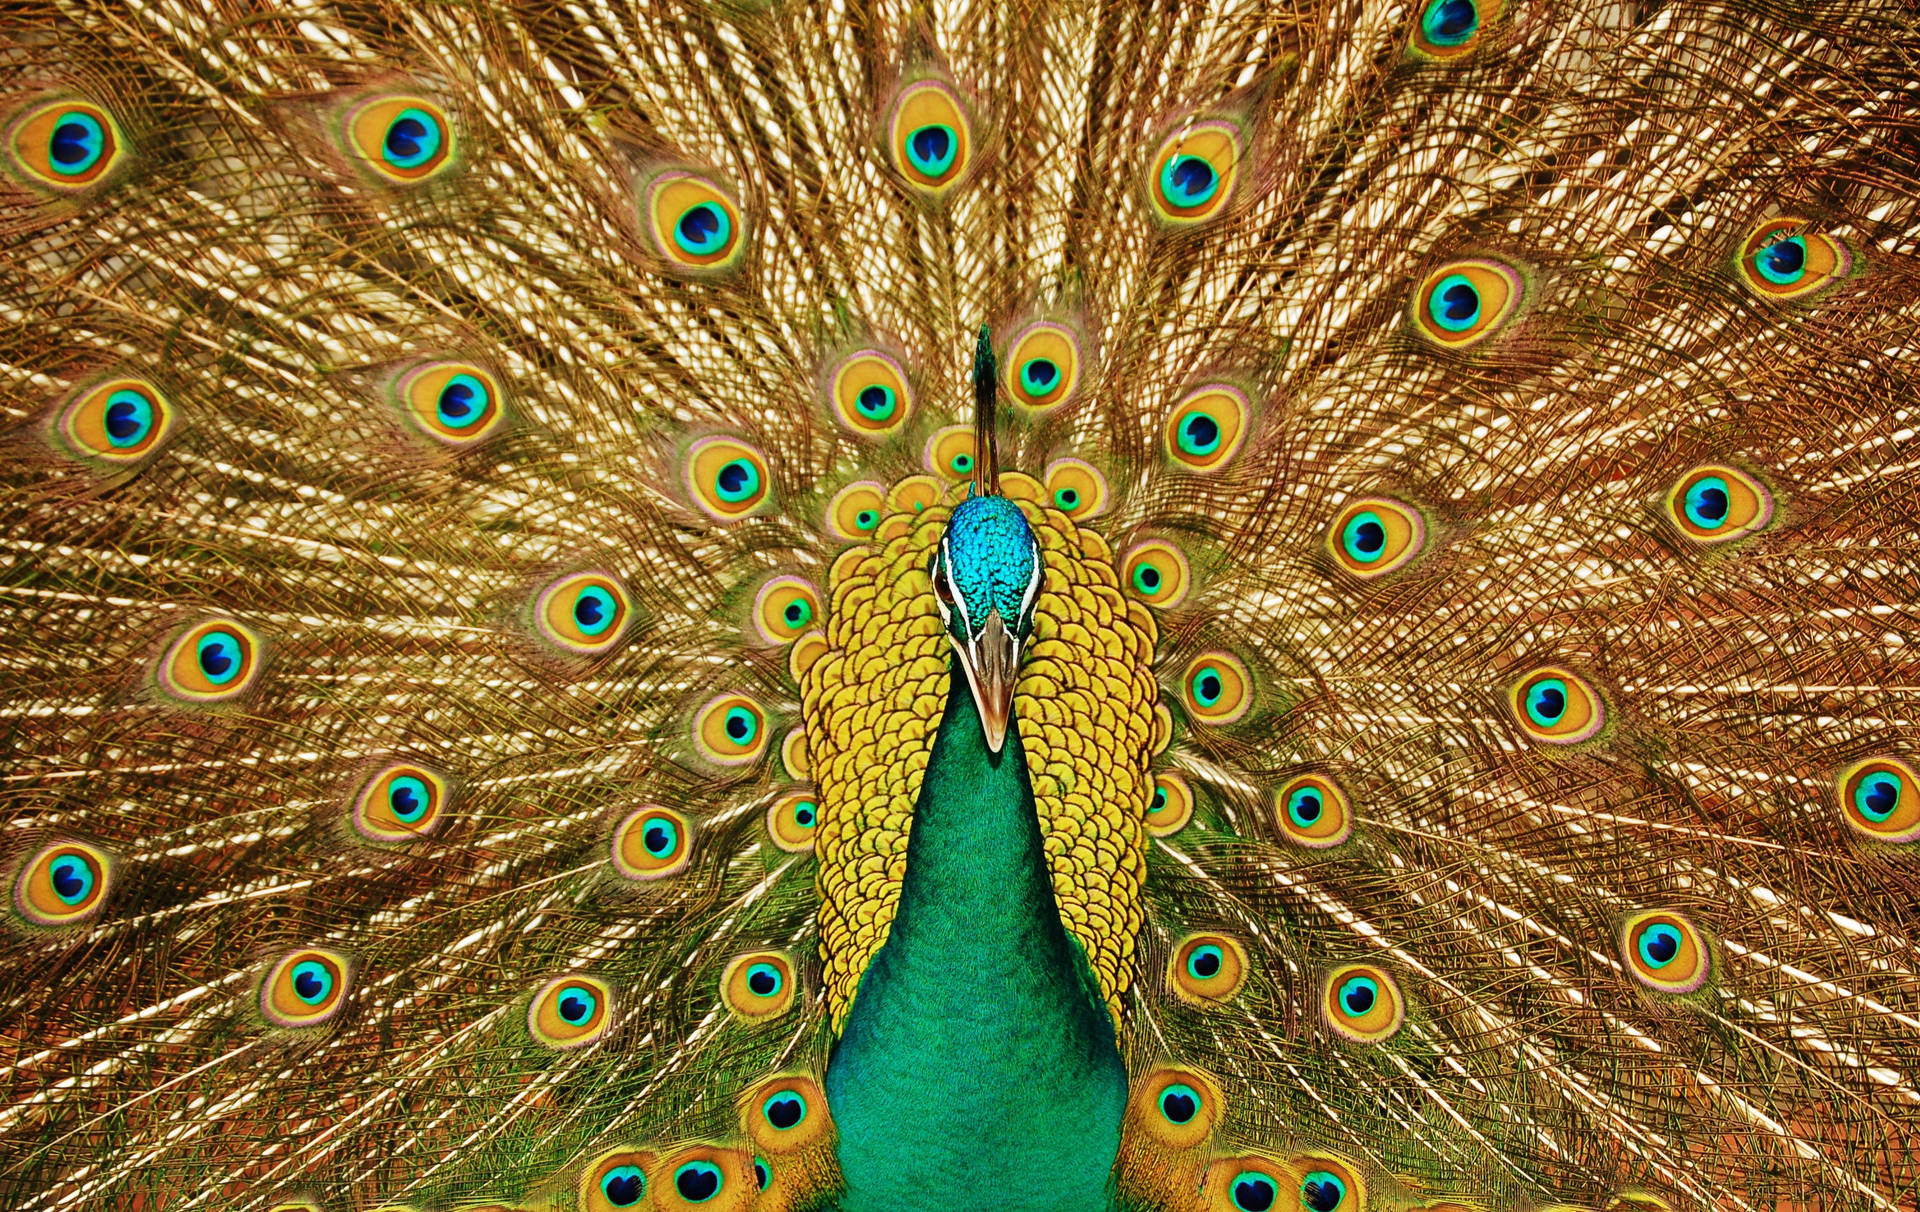 Peacock 3008X1899 Wallpaper and Background Image